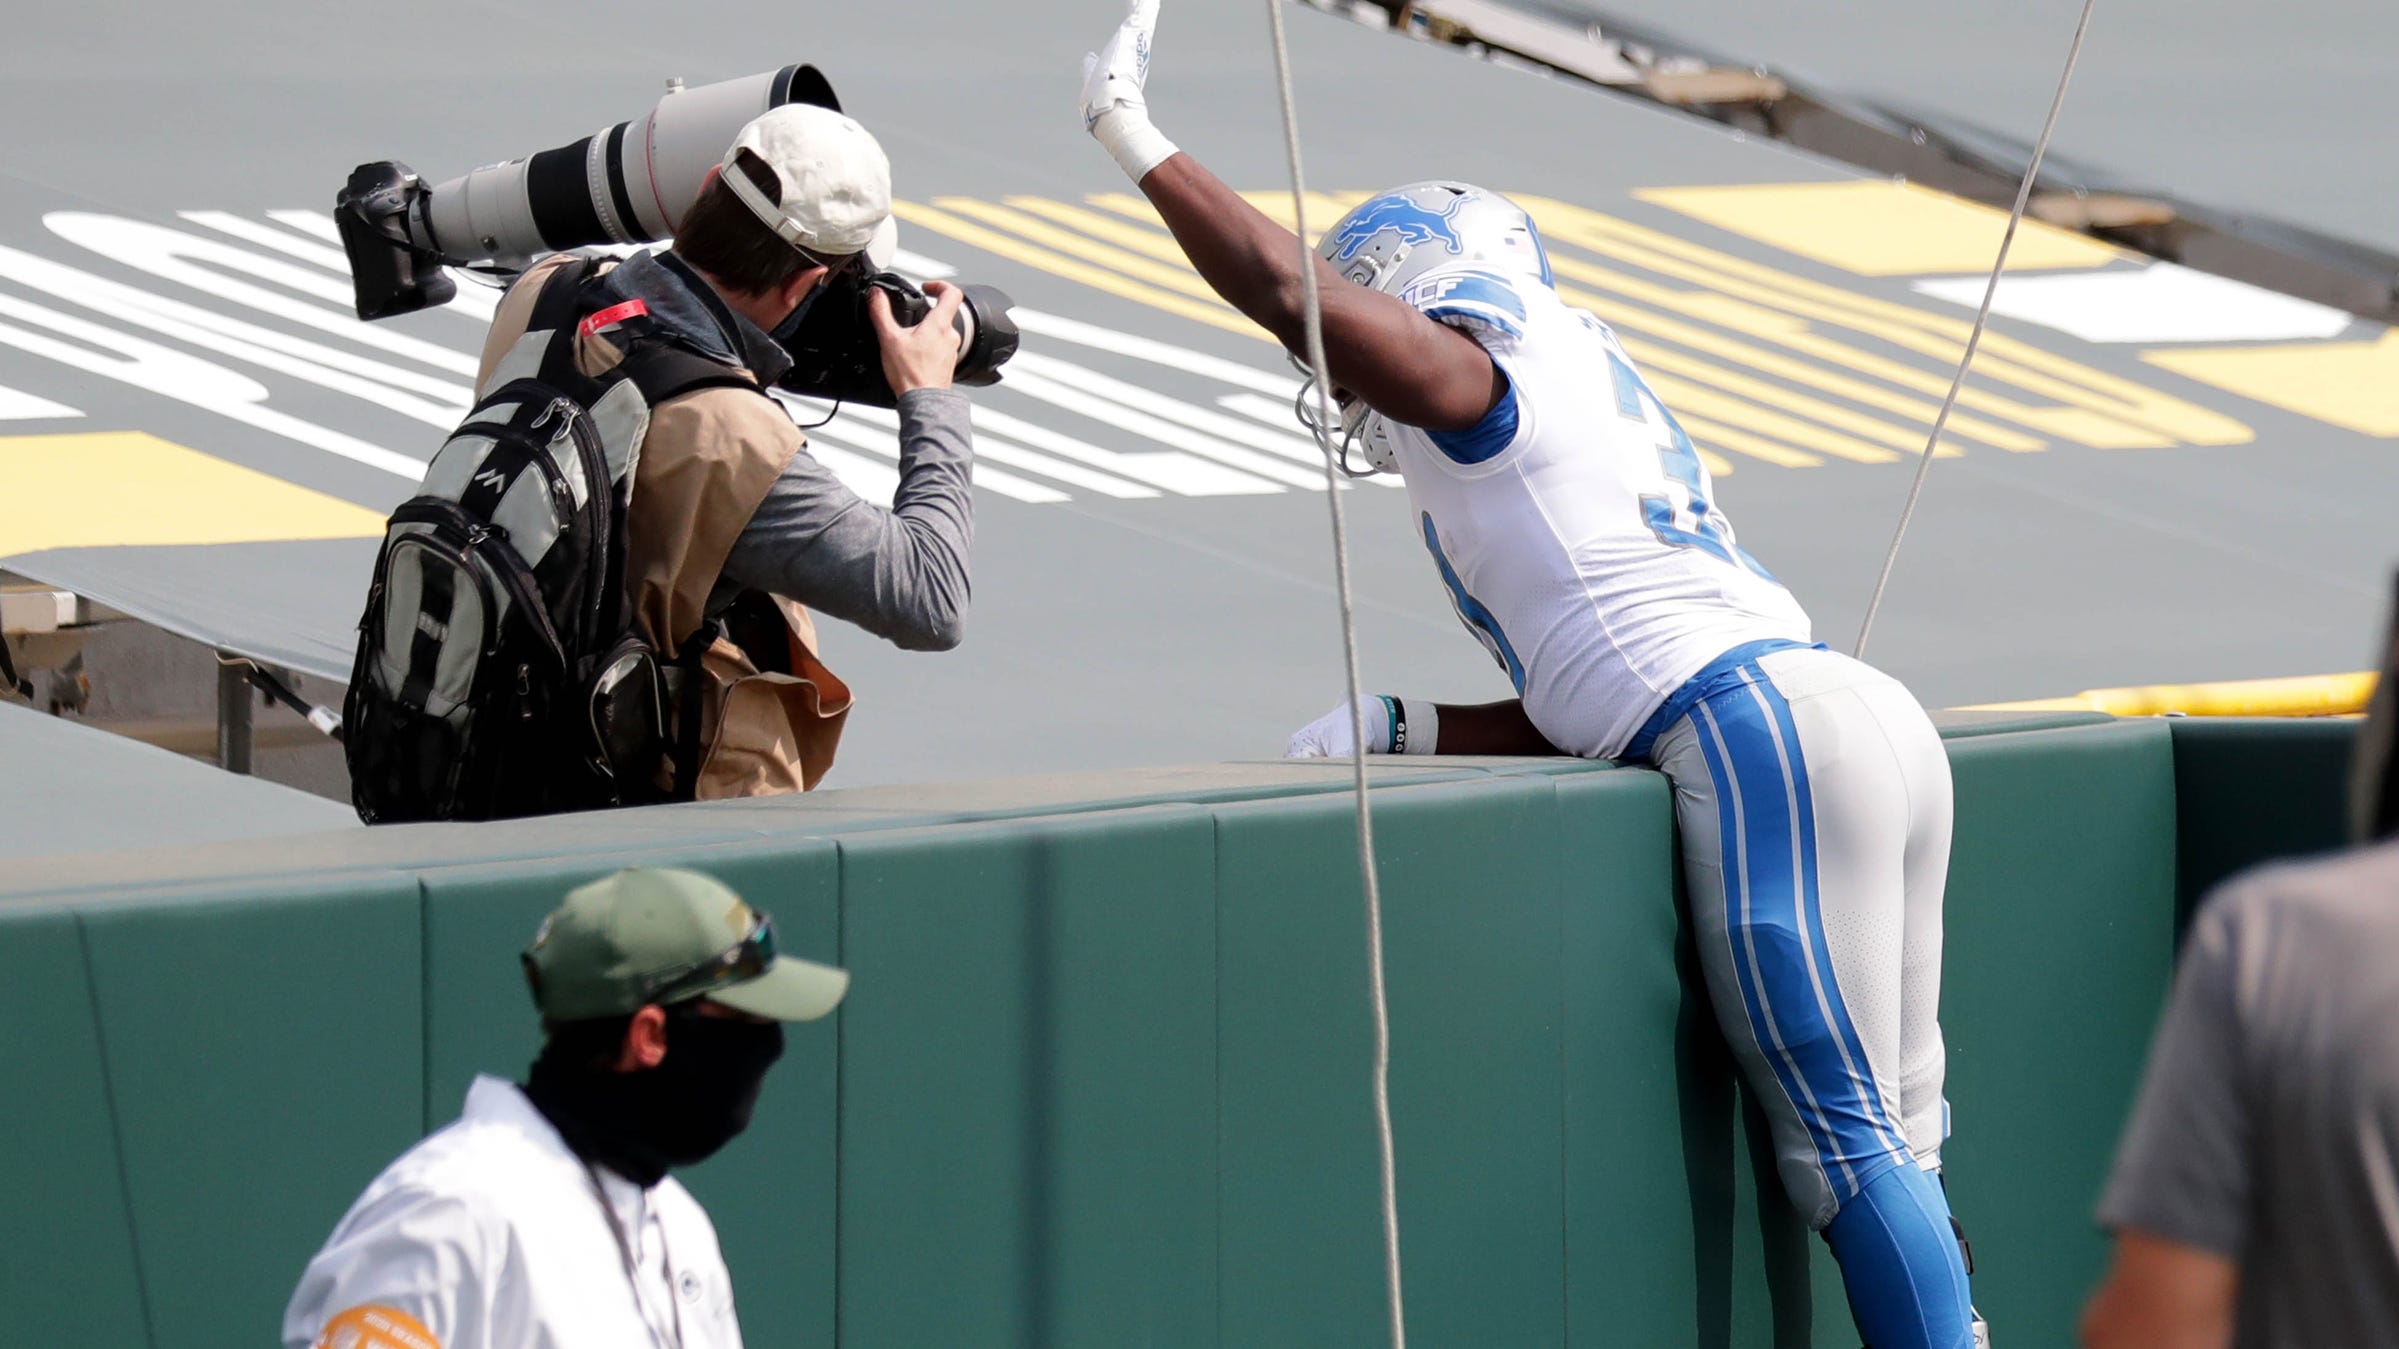 Detroit Lions running back Kerryon Johnson (33) celebrates a touchdown by jumping into the stands with no fans during the first quarter of the Green Bay Packers play the Detroit Lions at Lambeau Field in Green Bay on Sunday, Sept. 20, 2020.